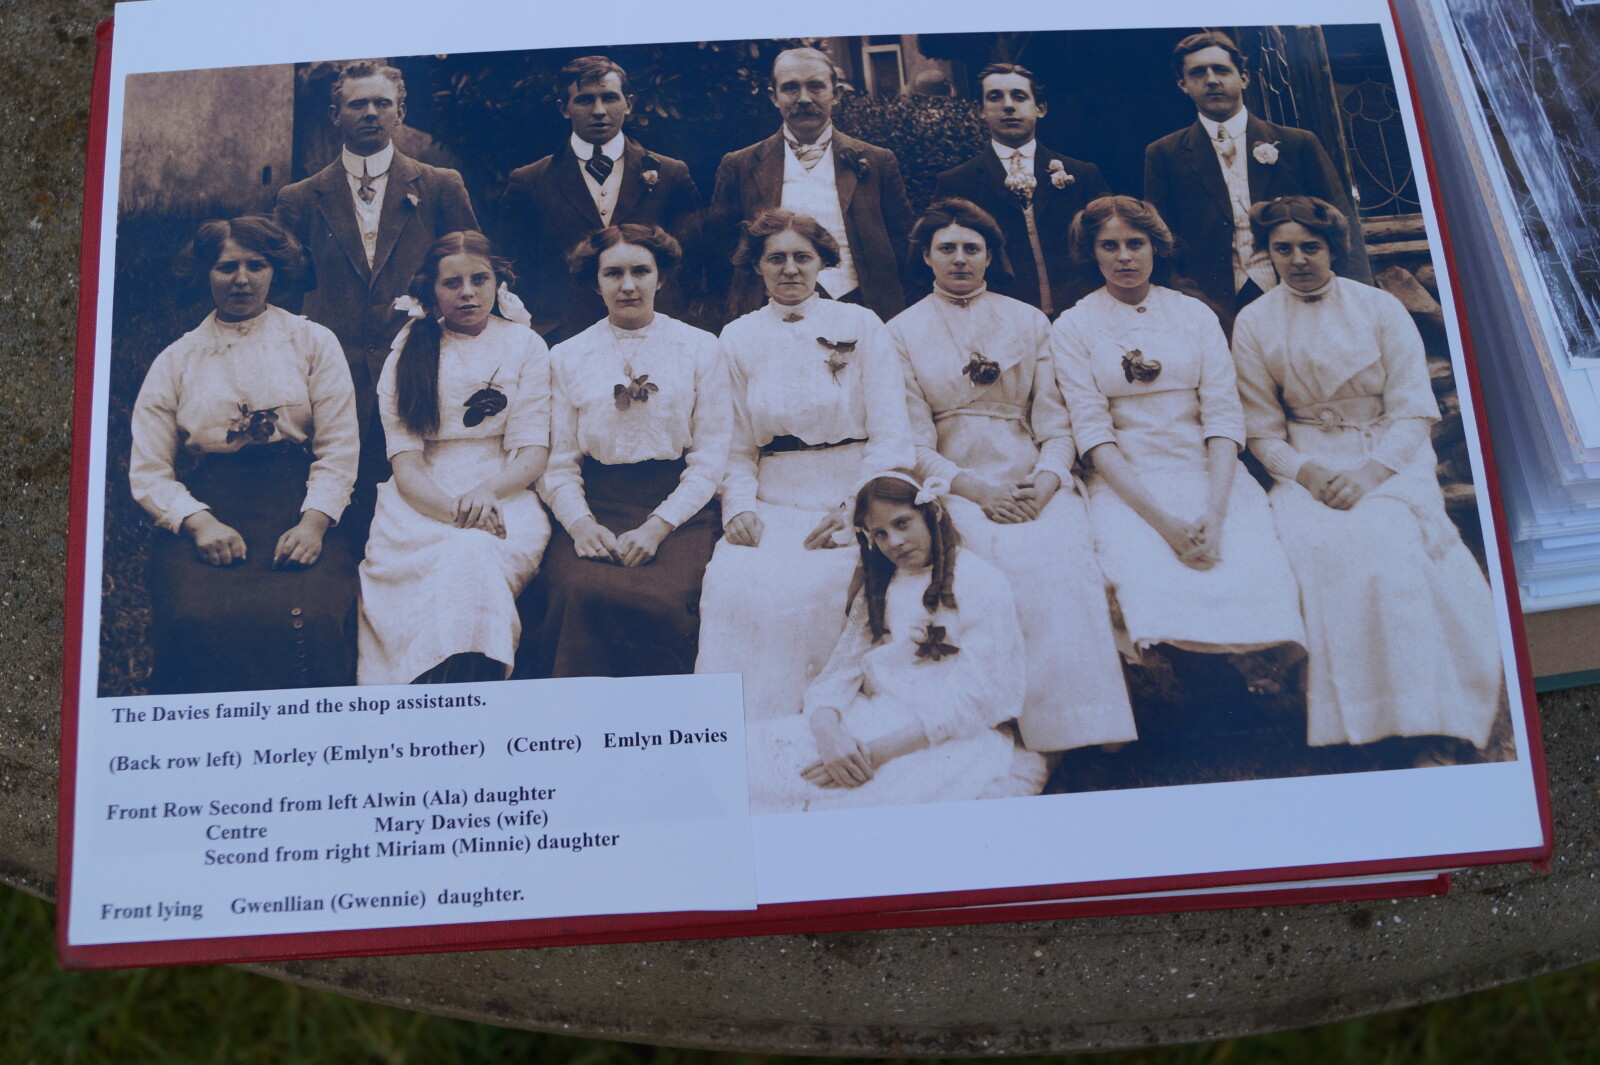 Album photo of the Davies family and shop assistants